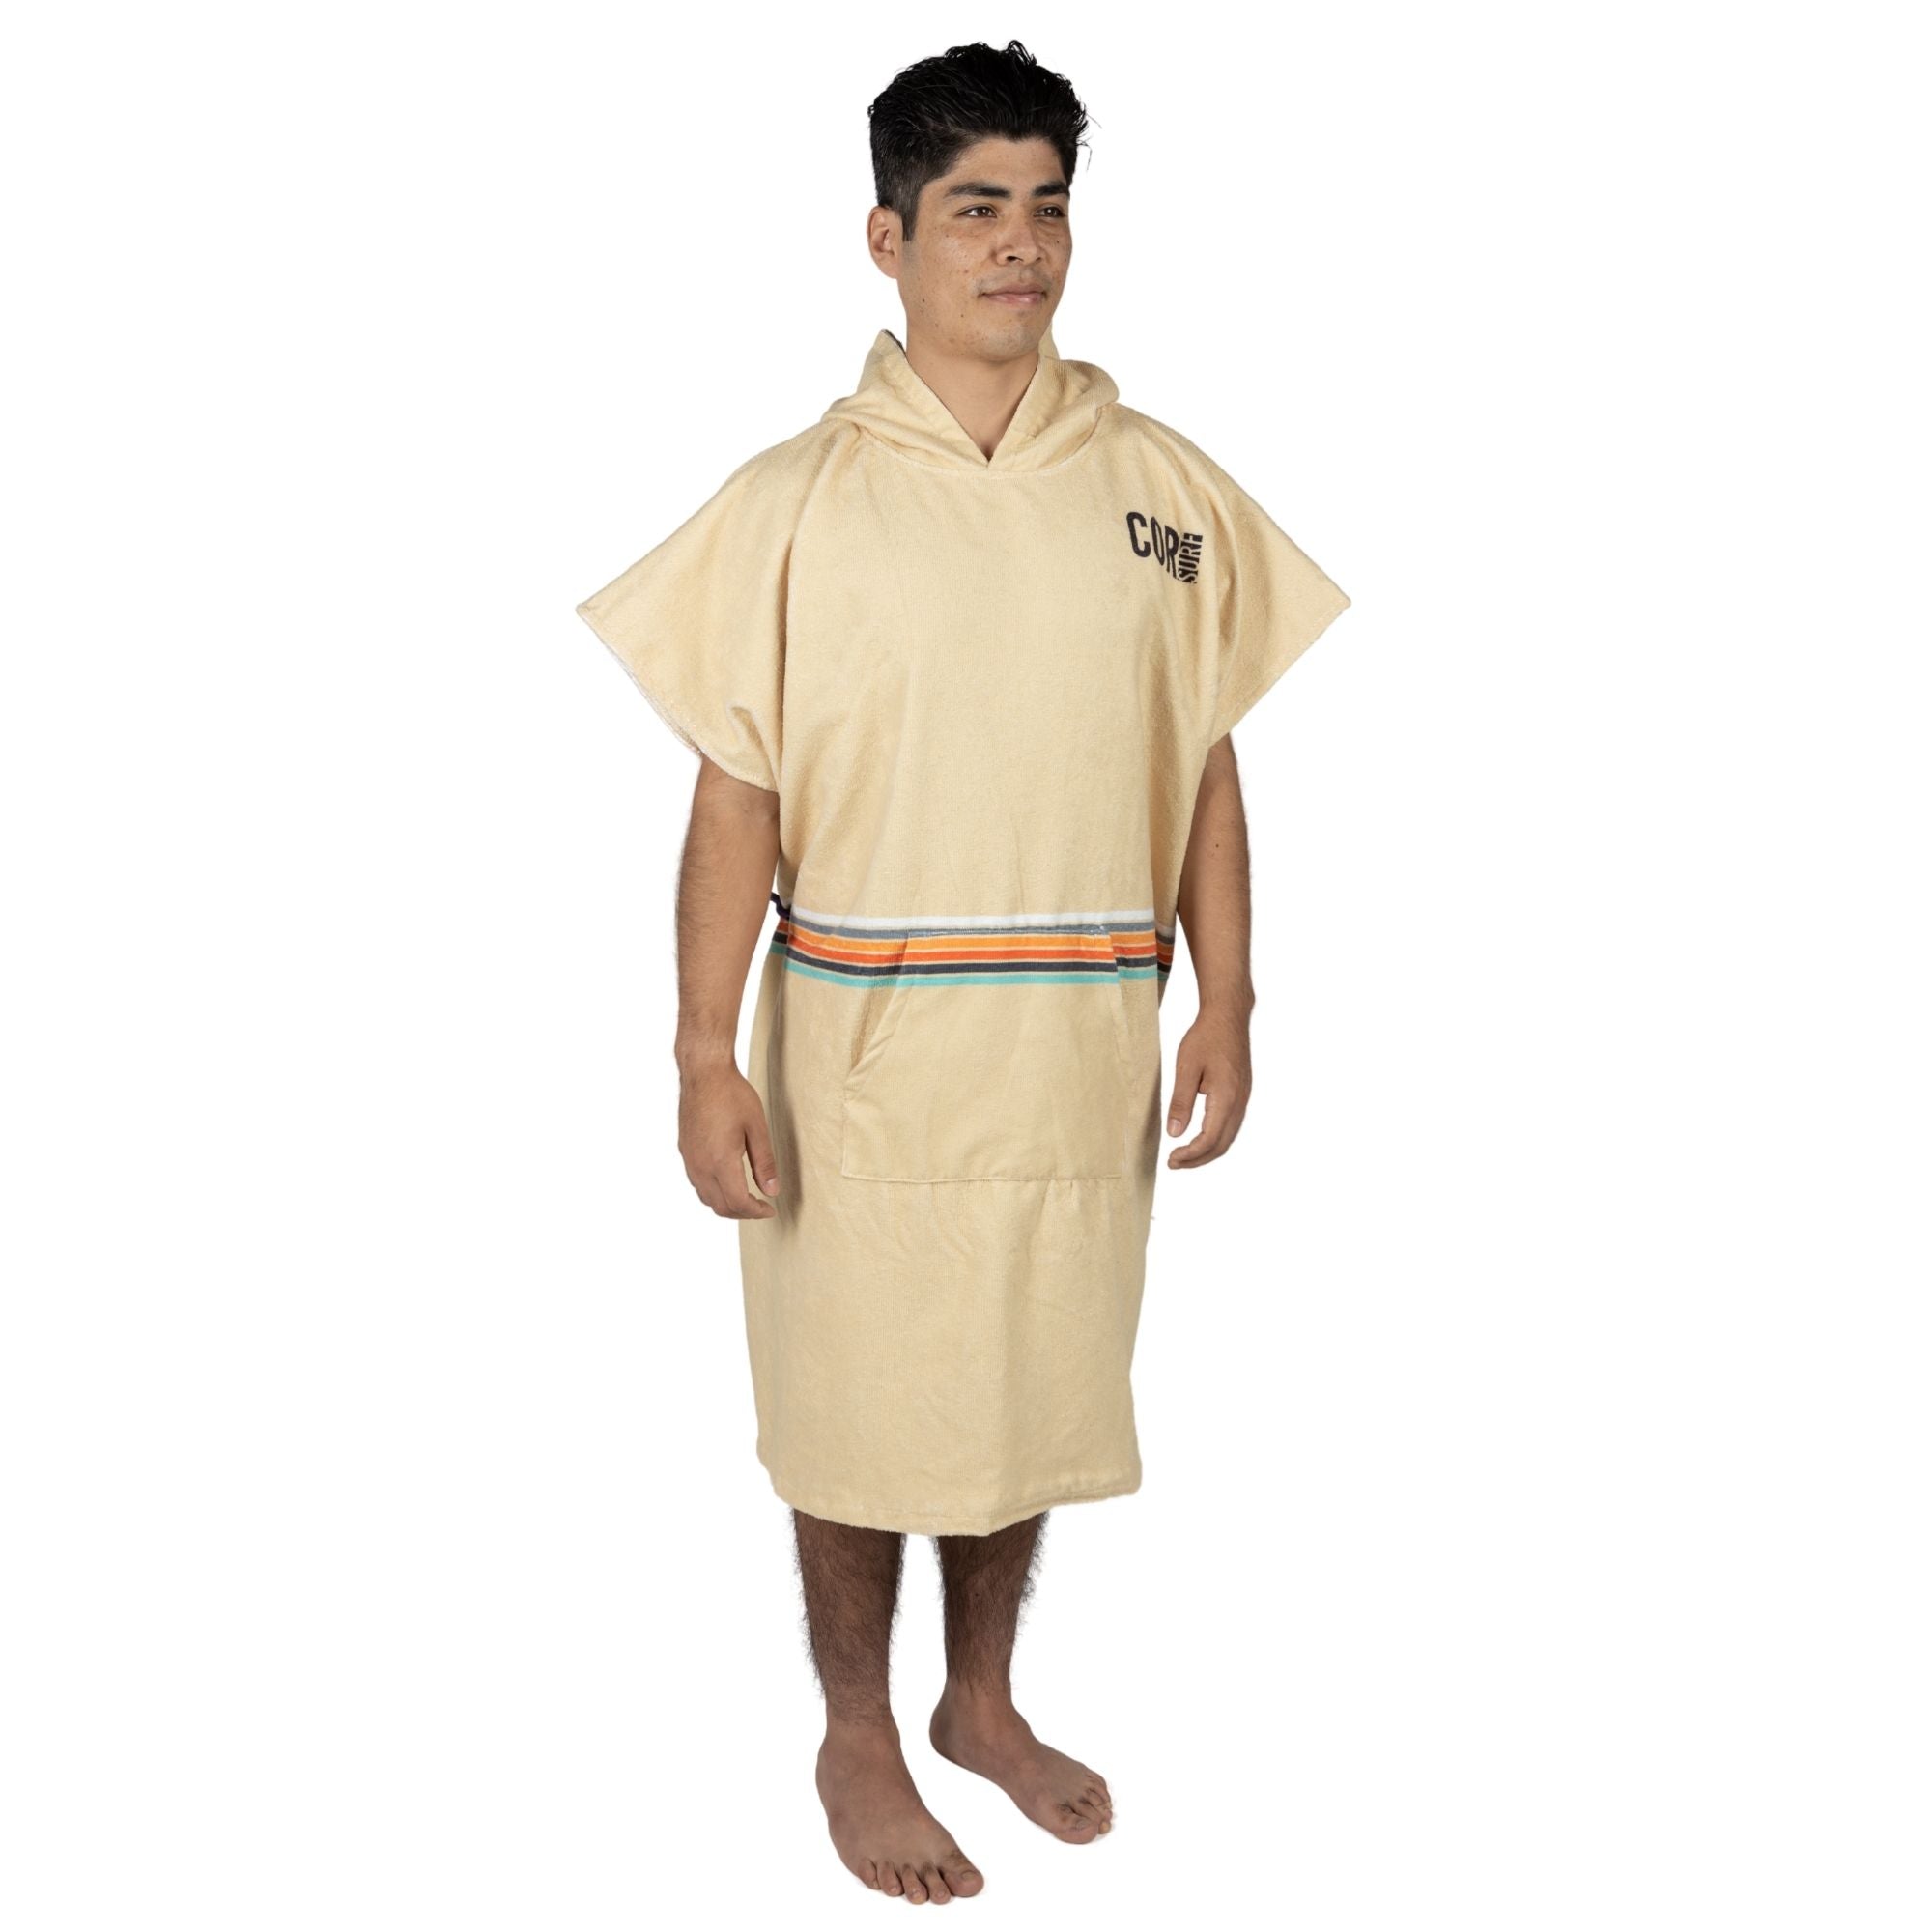 Retro Sand Changing Towel Poncho - Adult Large